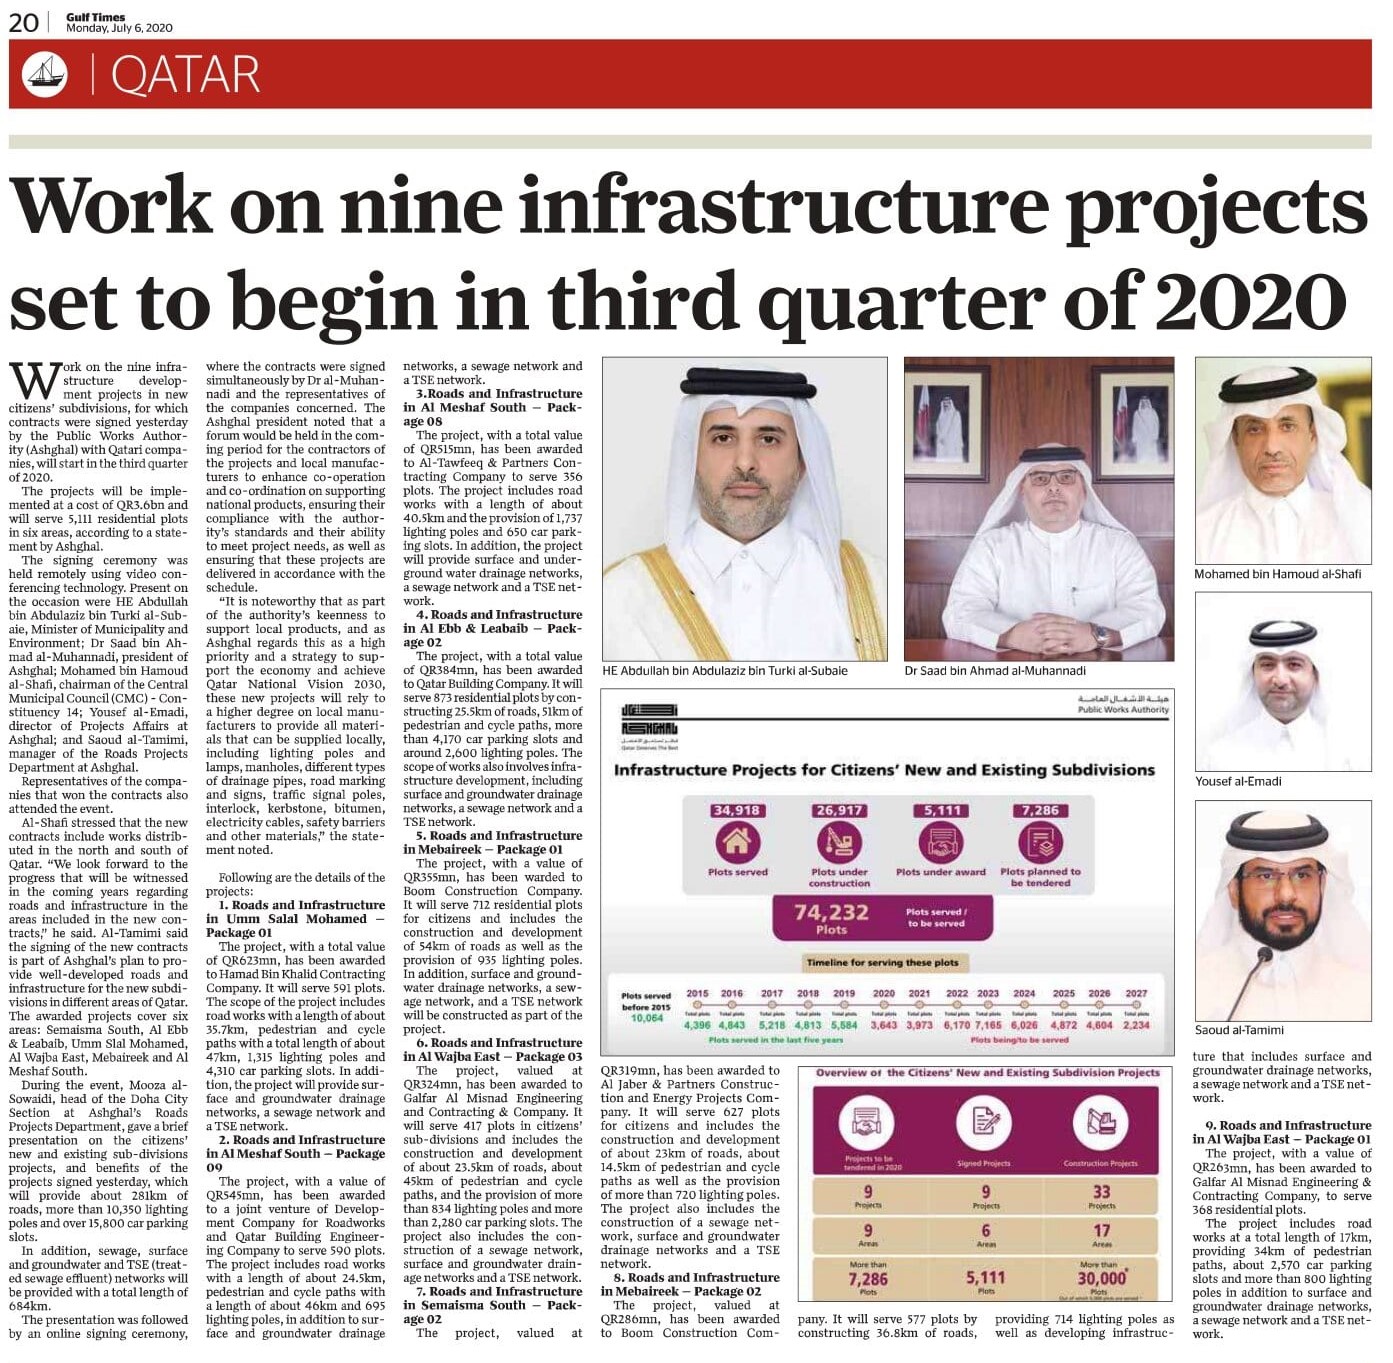 Ashghal signs 9 Contracts for Land Development